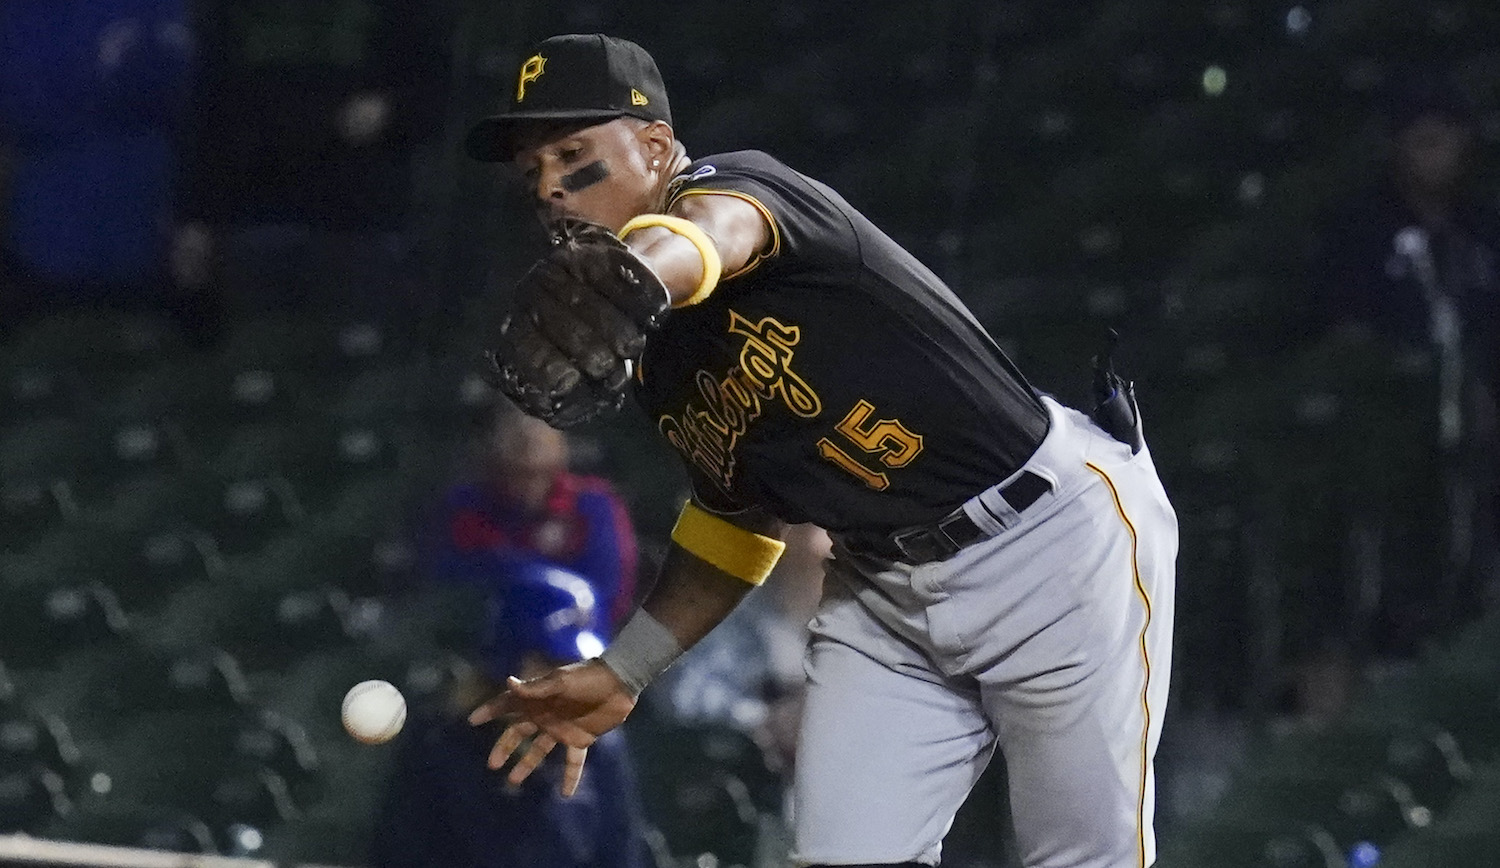 CHICAGO, ILLINOIS - SEPTEMBER 02: Wilmer Difo #15 of the Pittsburgh Pirates commits an error in the 11th inning against the Chicago Cubs at Wrigley Field on September 02, 2021 in Chicago, Illinois. The Cubs won 6-5 in 11 innings. (Photo by Nuccio DiNuzzo/Getty Images)